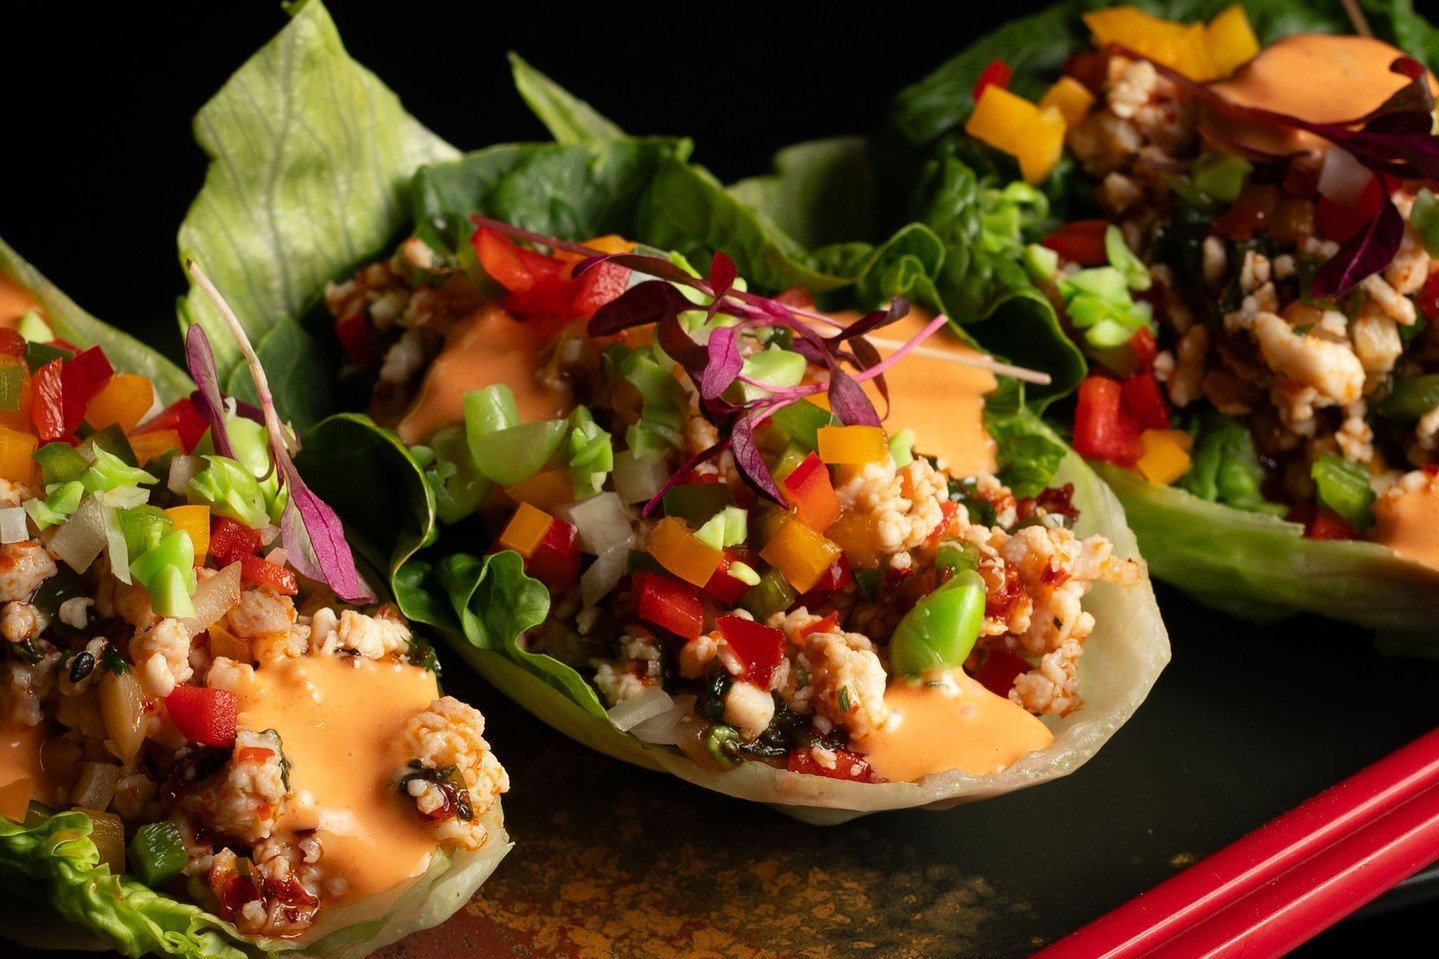 𝑺𝒂𝒏 𝑪𝒉𝒐𝒚 𝑩𝒐𝒘.

Western Chinese Lettuce Wraps with Ground Chicken, Basil, Garlic, Ginger, Water Chestnuts, Mushroom, Siracha Mayo and Pickled Cucumber.